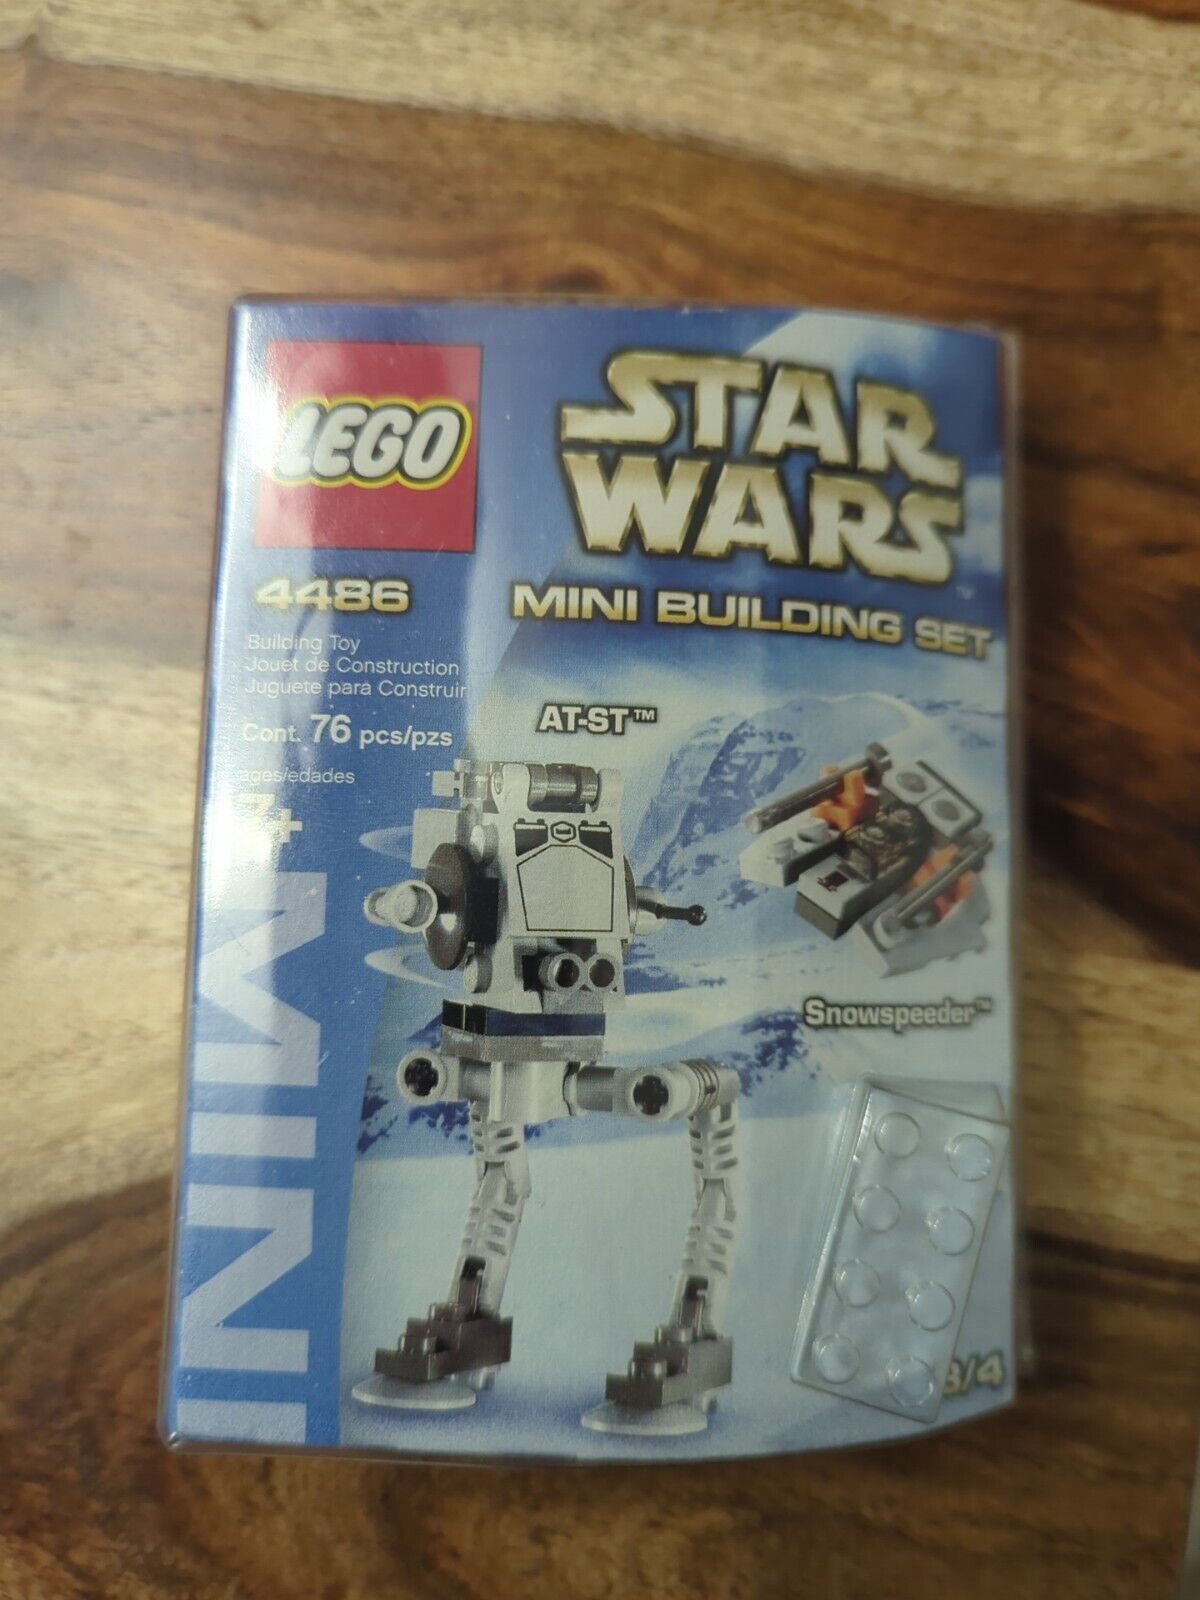 New Sealed 2004 LEGO Star Wars 4486 AT-ST and Snowspeeder Mini Building Set